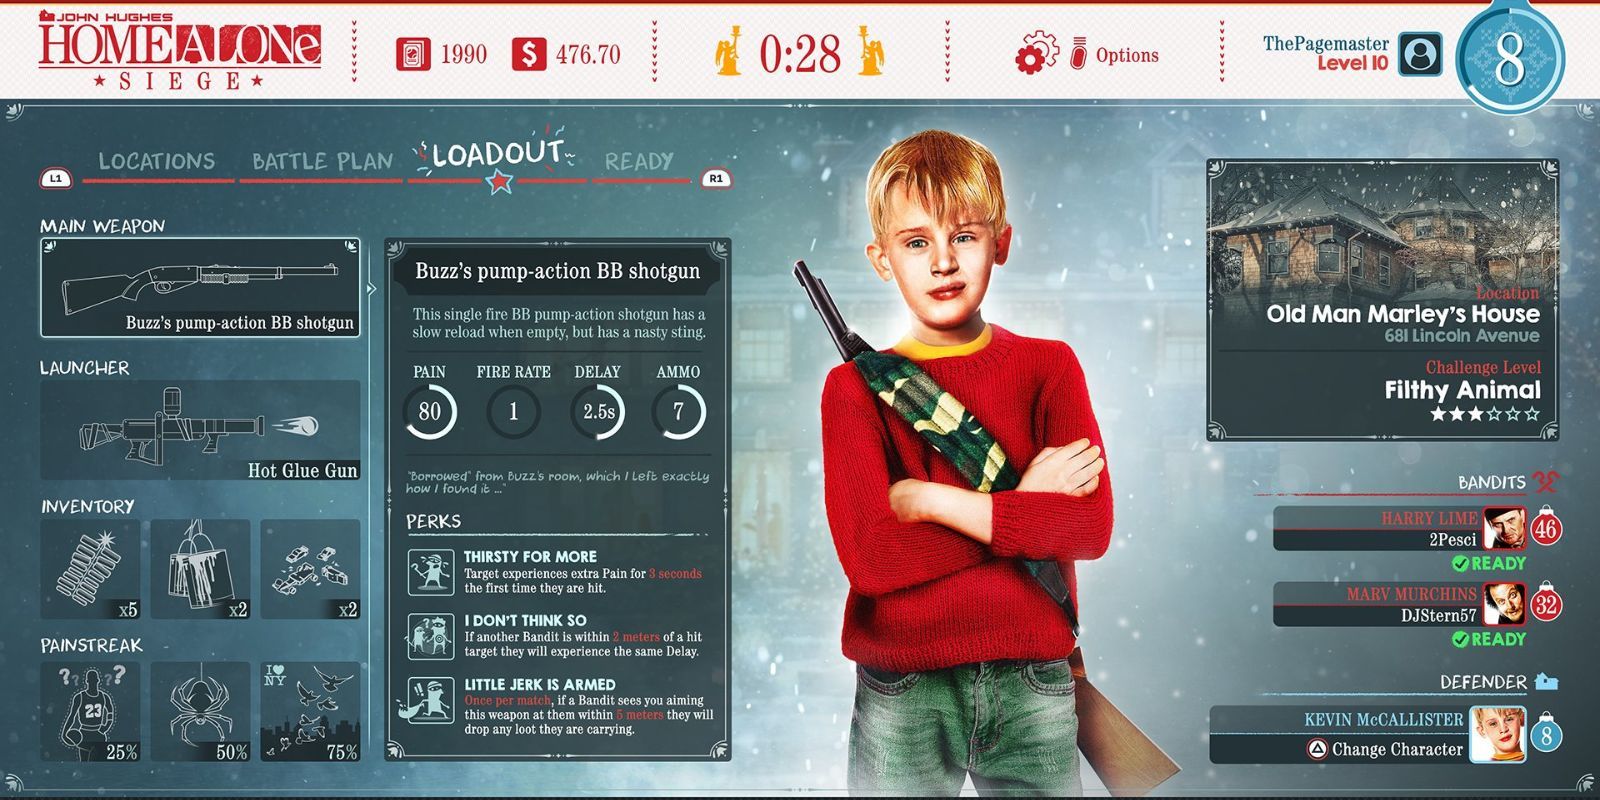 The menu screen for the fictional Home Alone Siege game